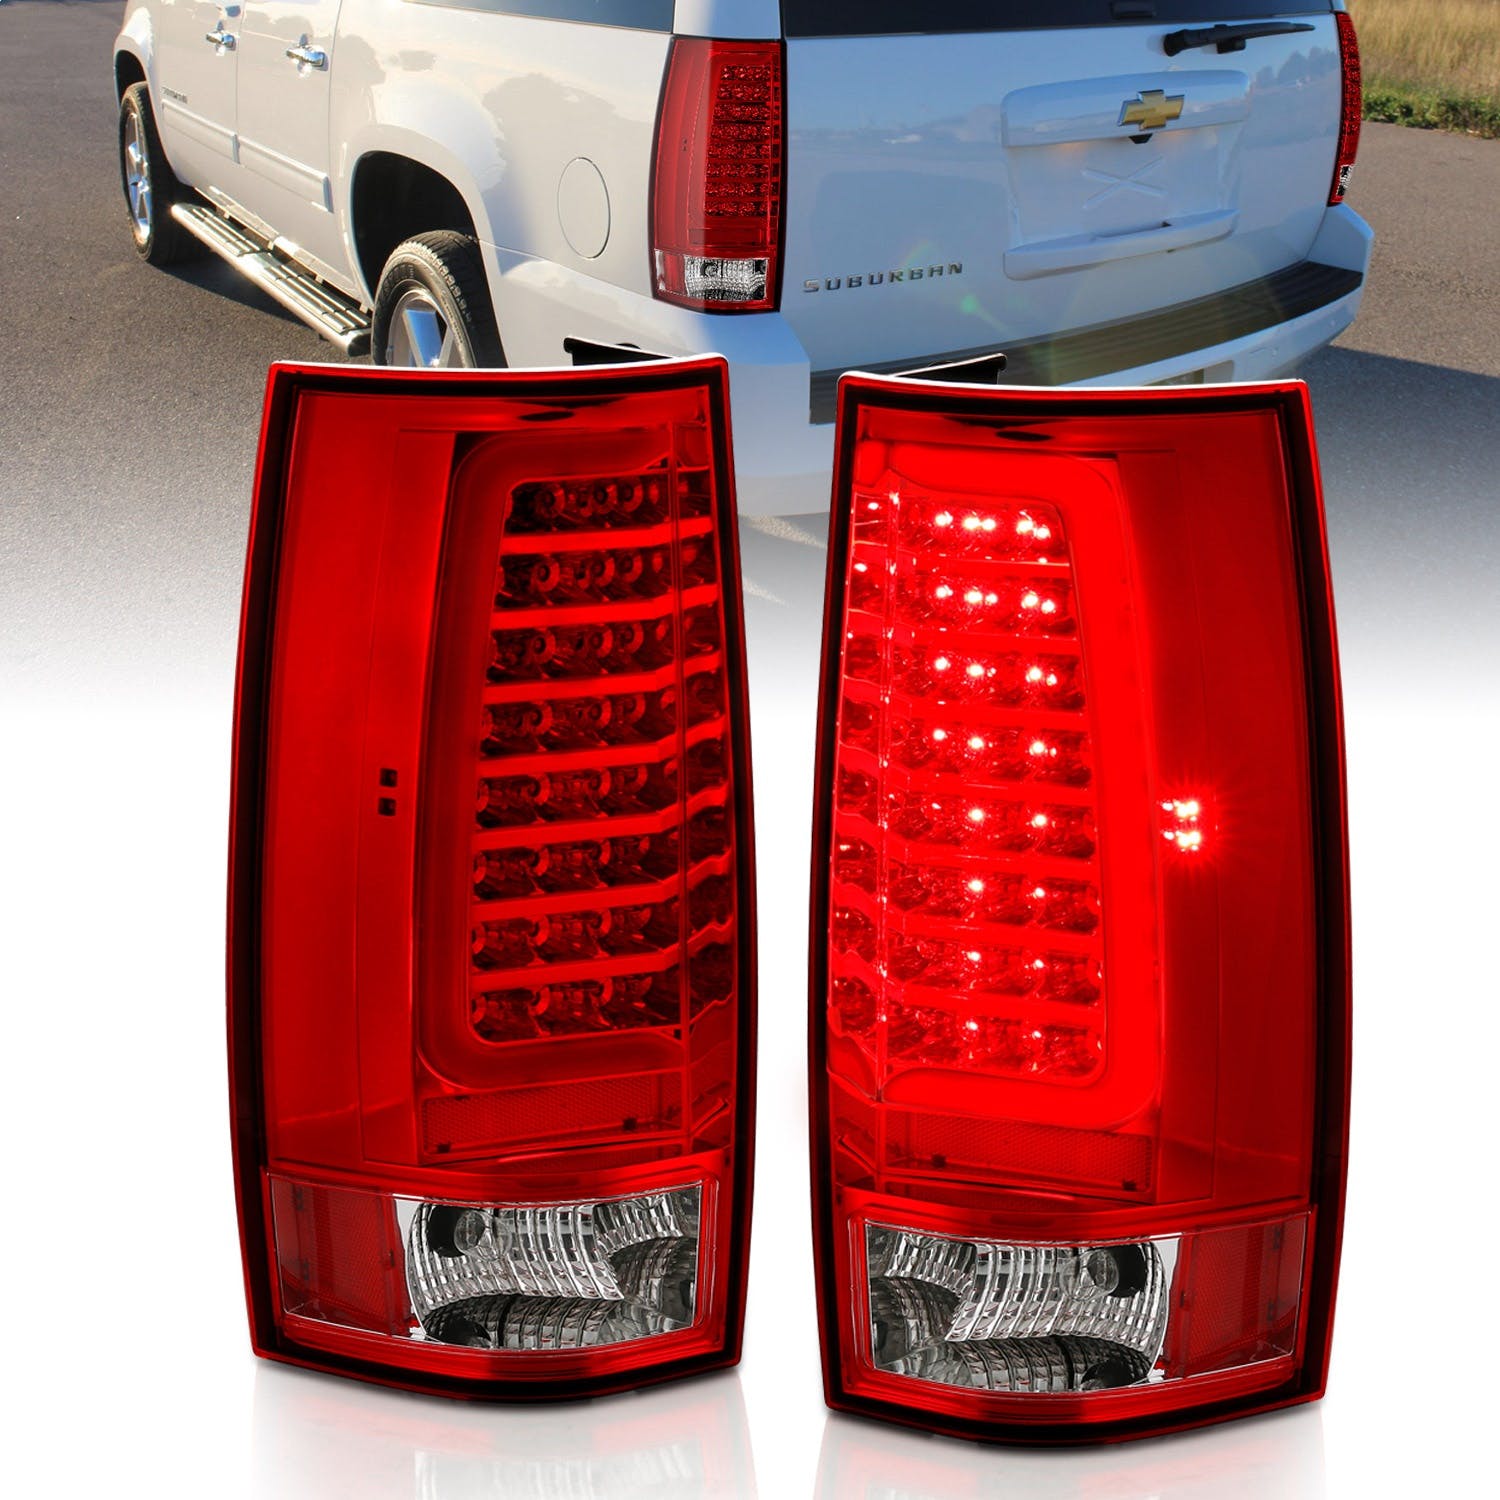 AnzoUSA 311323 LED Taillight Plank Style Chrome with Red/Clear Lens